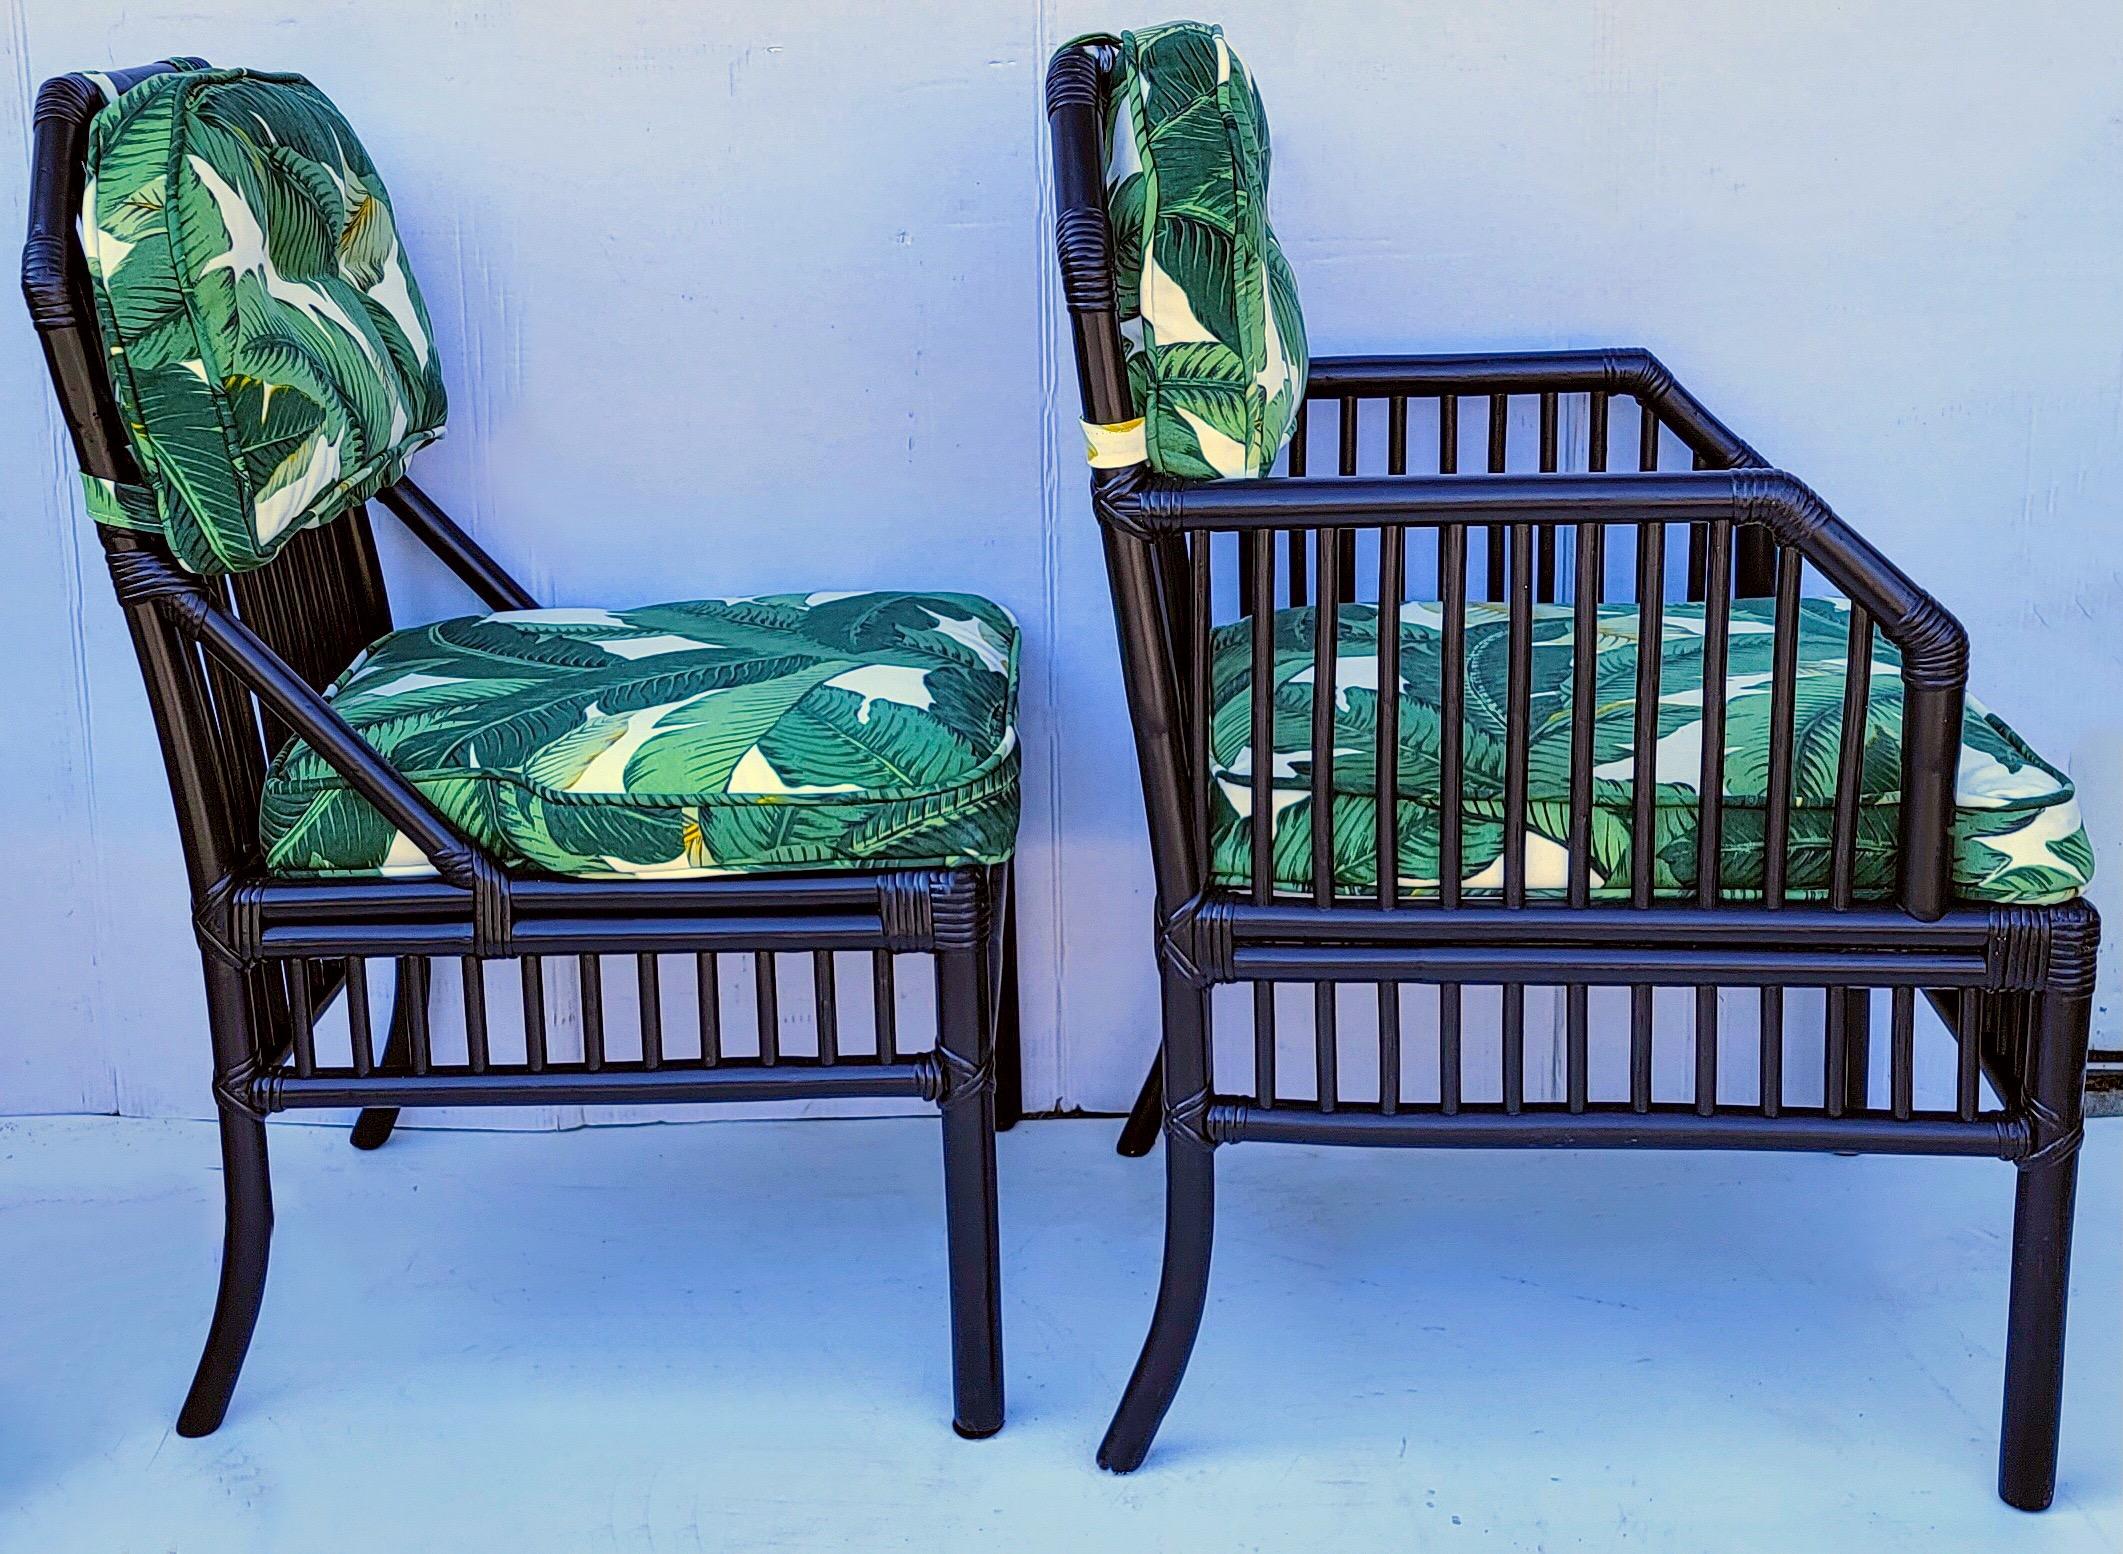 20th Century Black Ficks Reed Rattan Dining Chairs in Tropical Banana Leaf Fabric, Set of 6